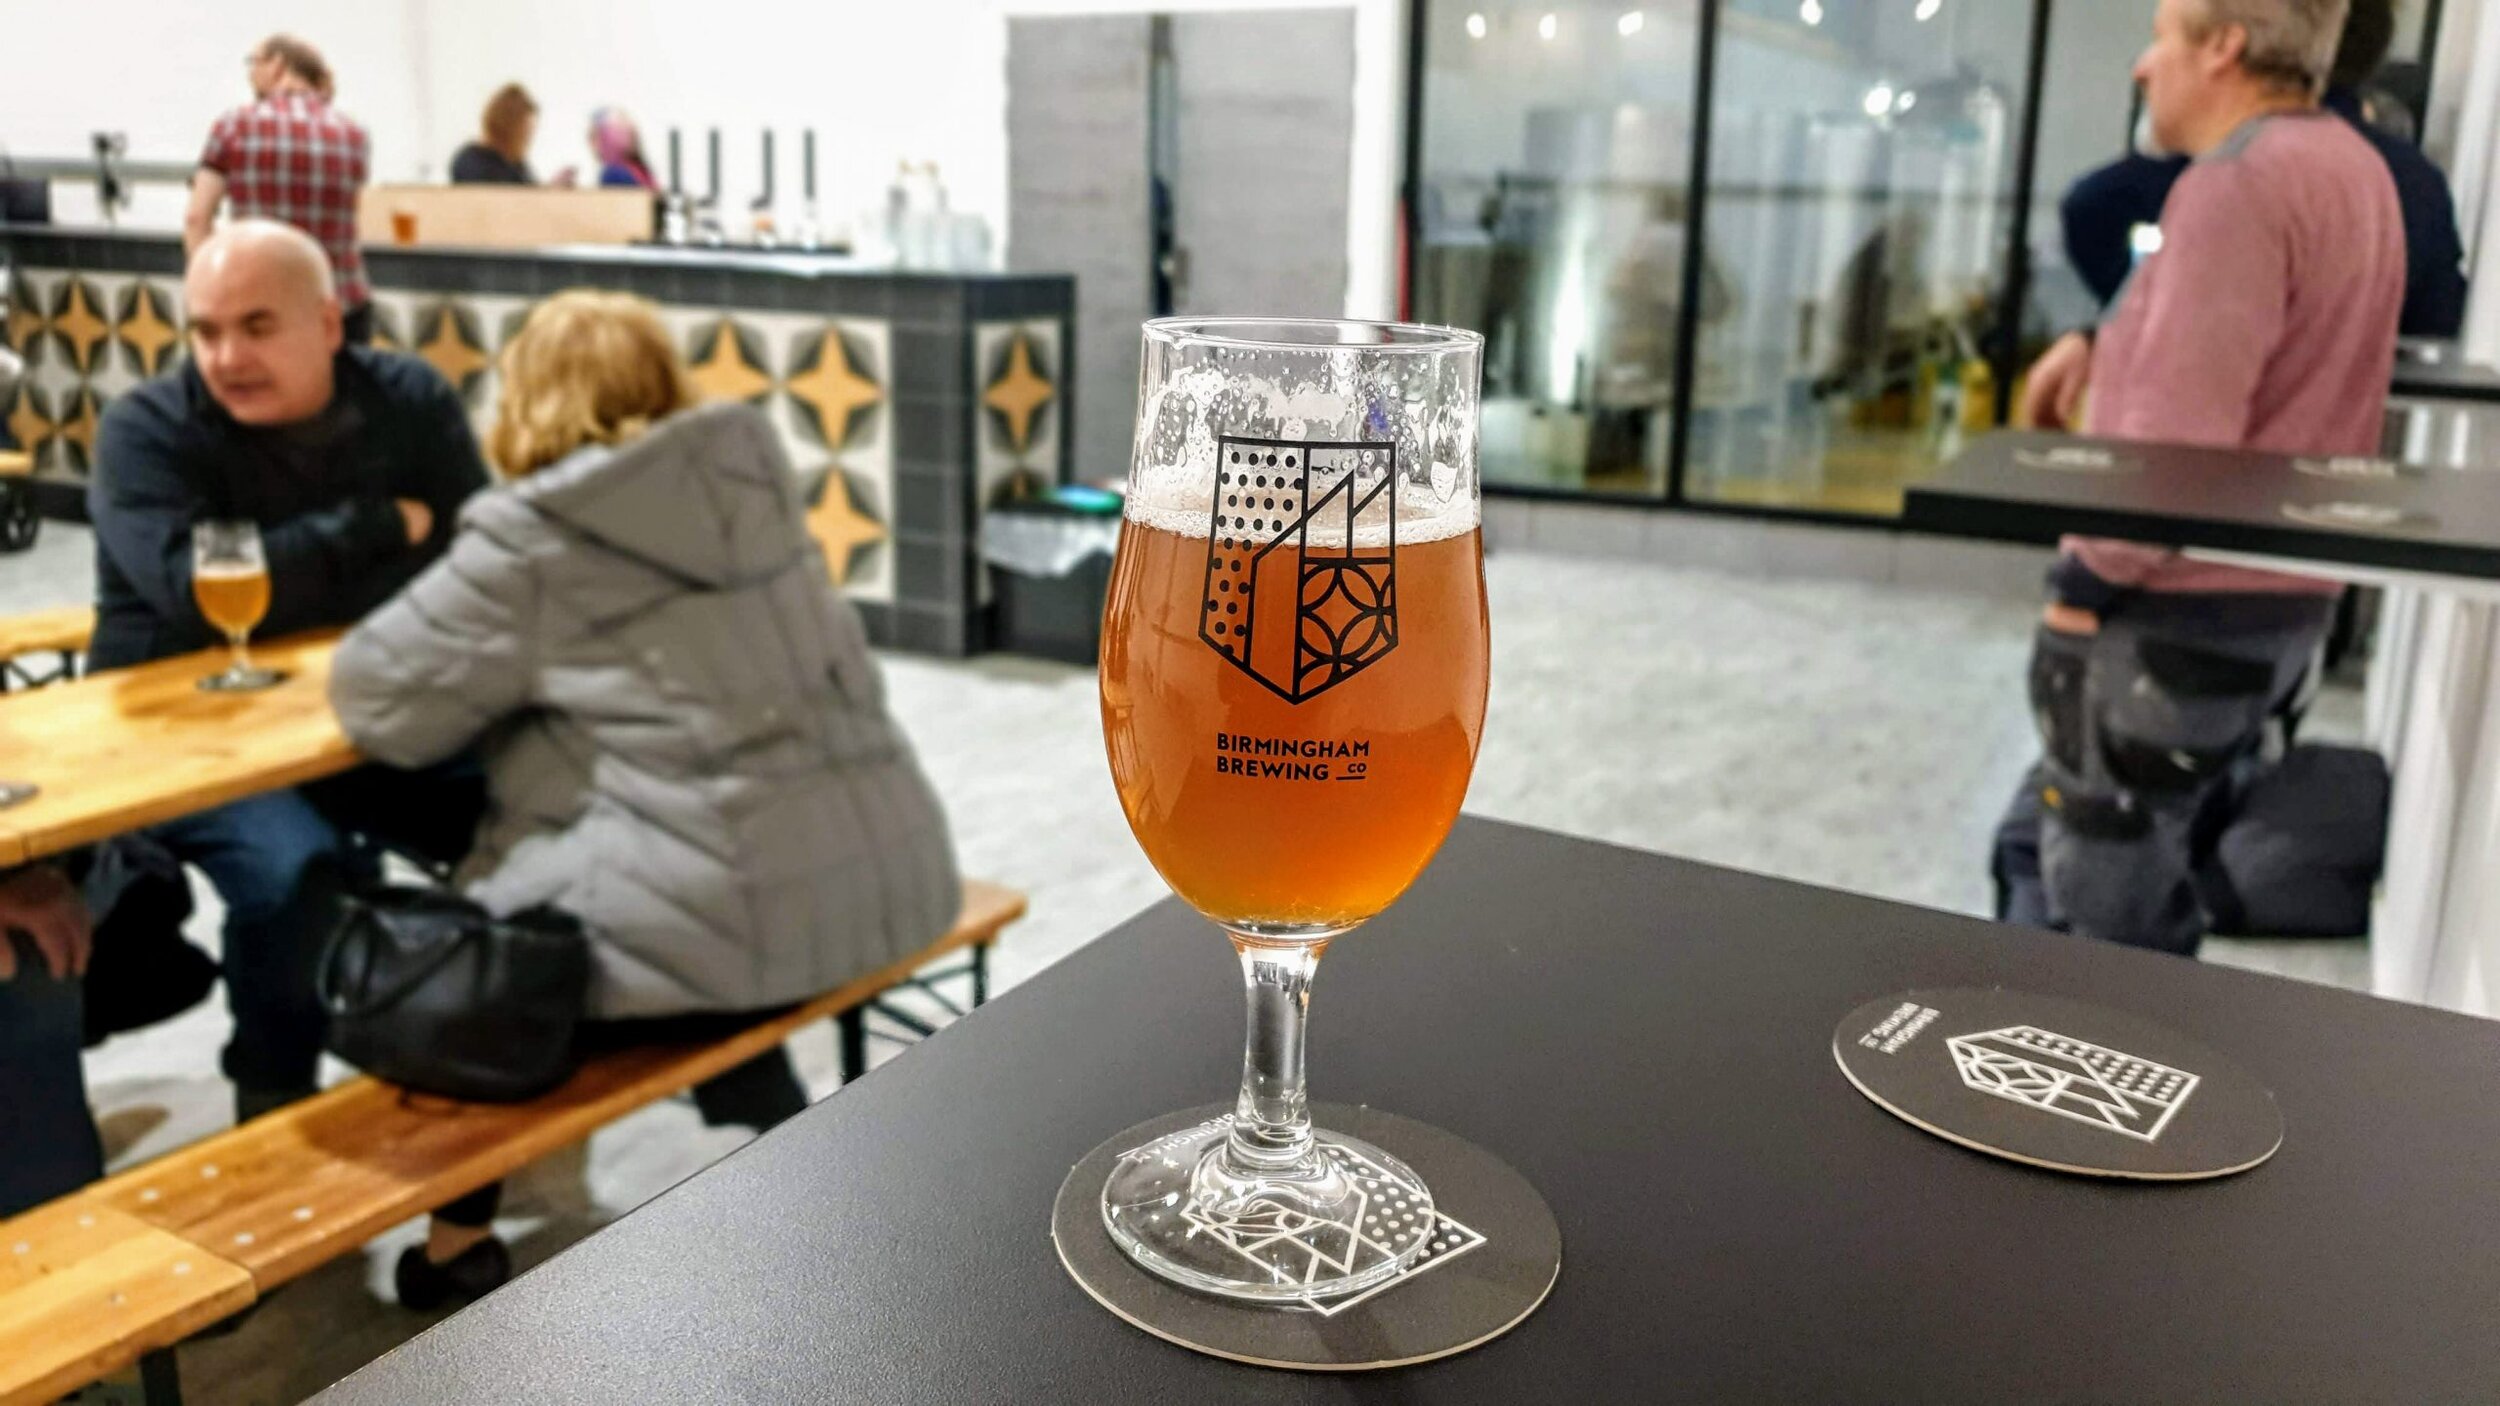 Picture of Birmingham Brewing Company's taproom by BeerYeti, with a pint of Pale Brummie in Birmingham